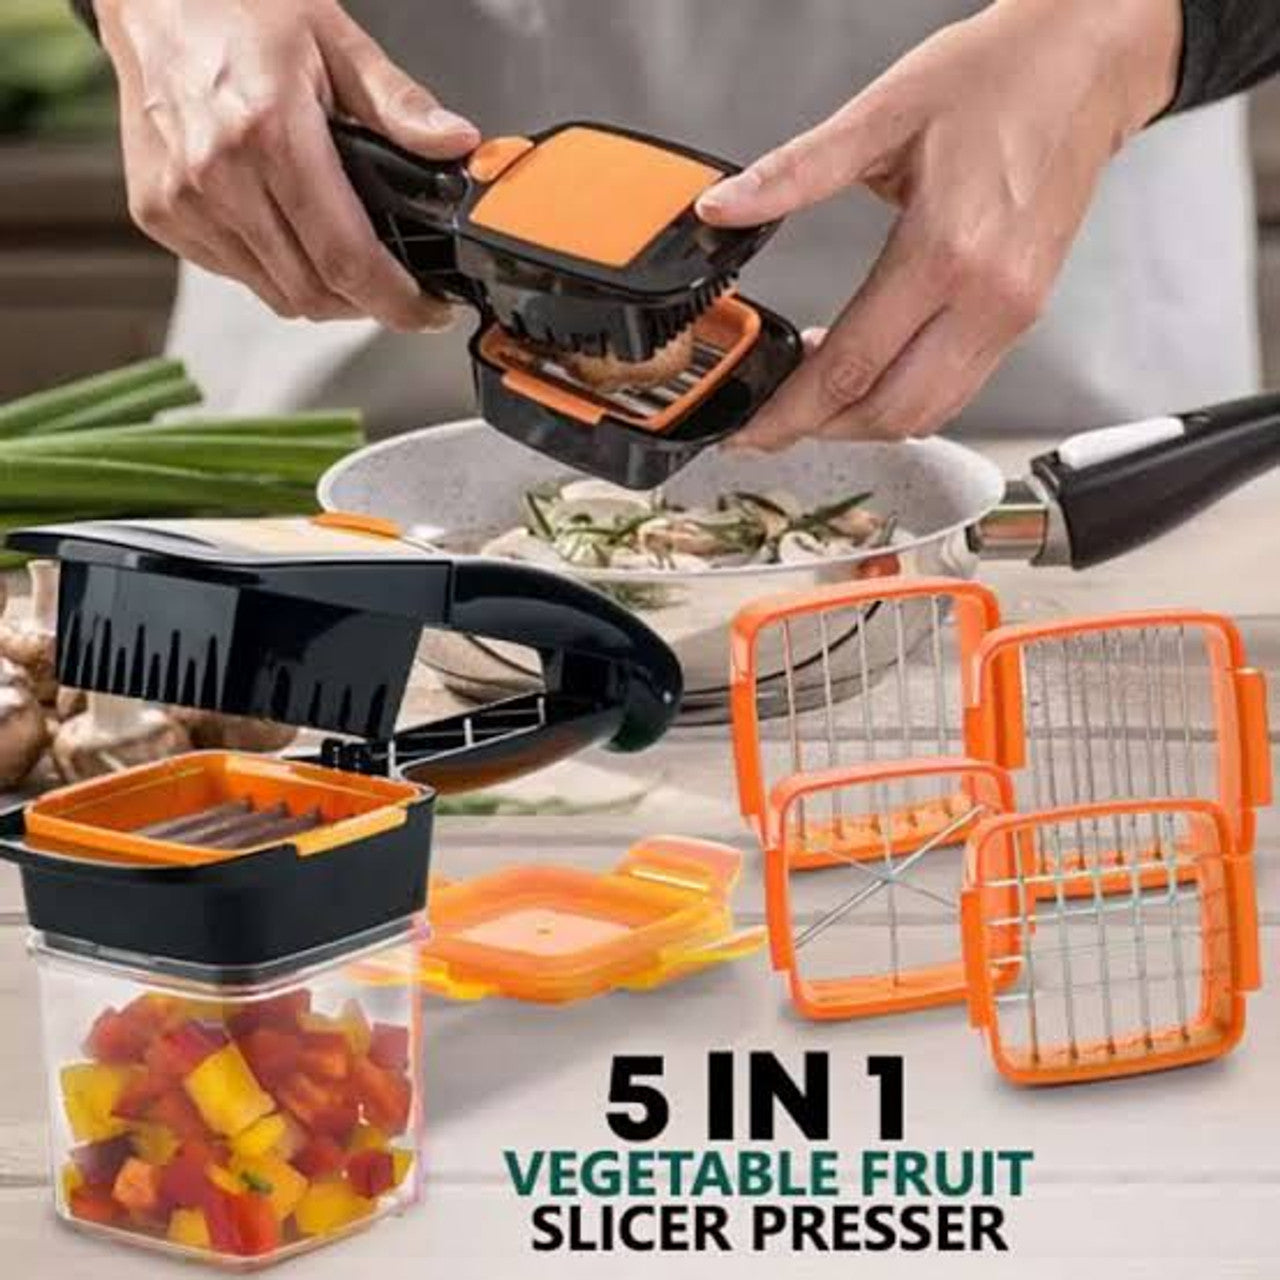 Products Nicer Dicer 5 in 1 Multi-Cutter Quick Food Fruit Vegetable Cutter Slicer Speedy Chopper kitchen accessories